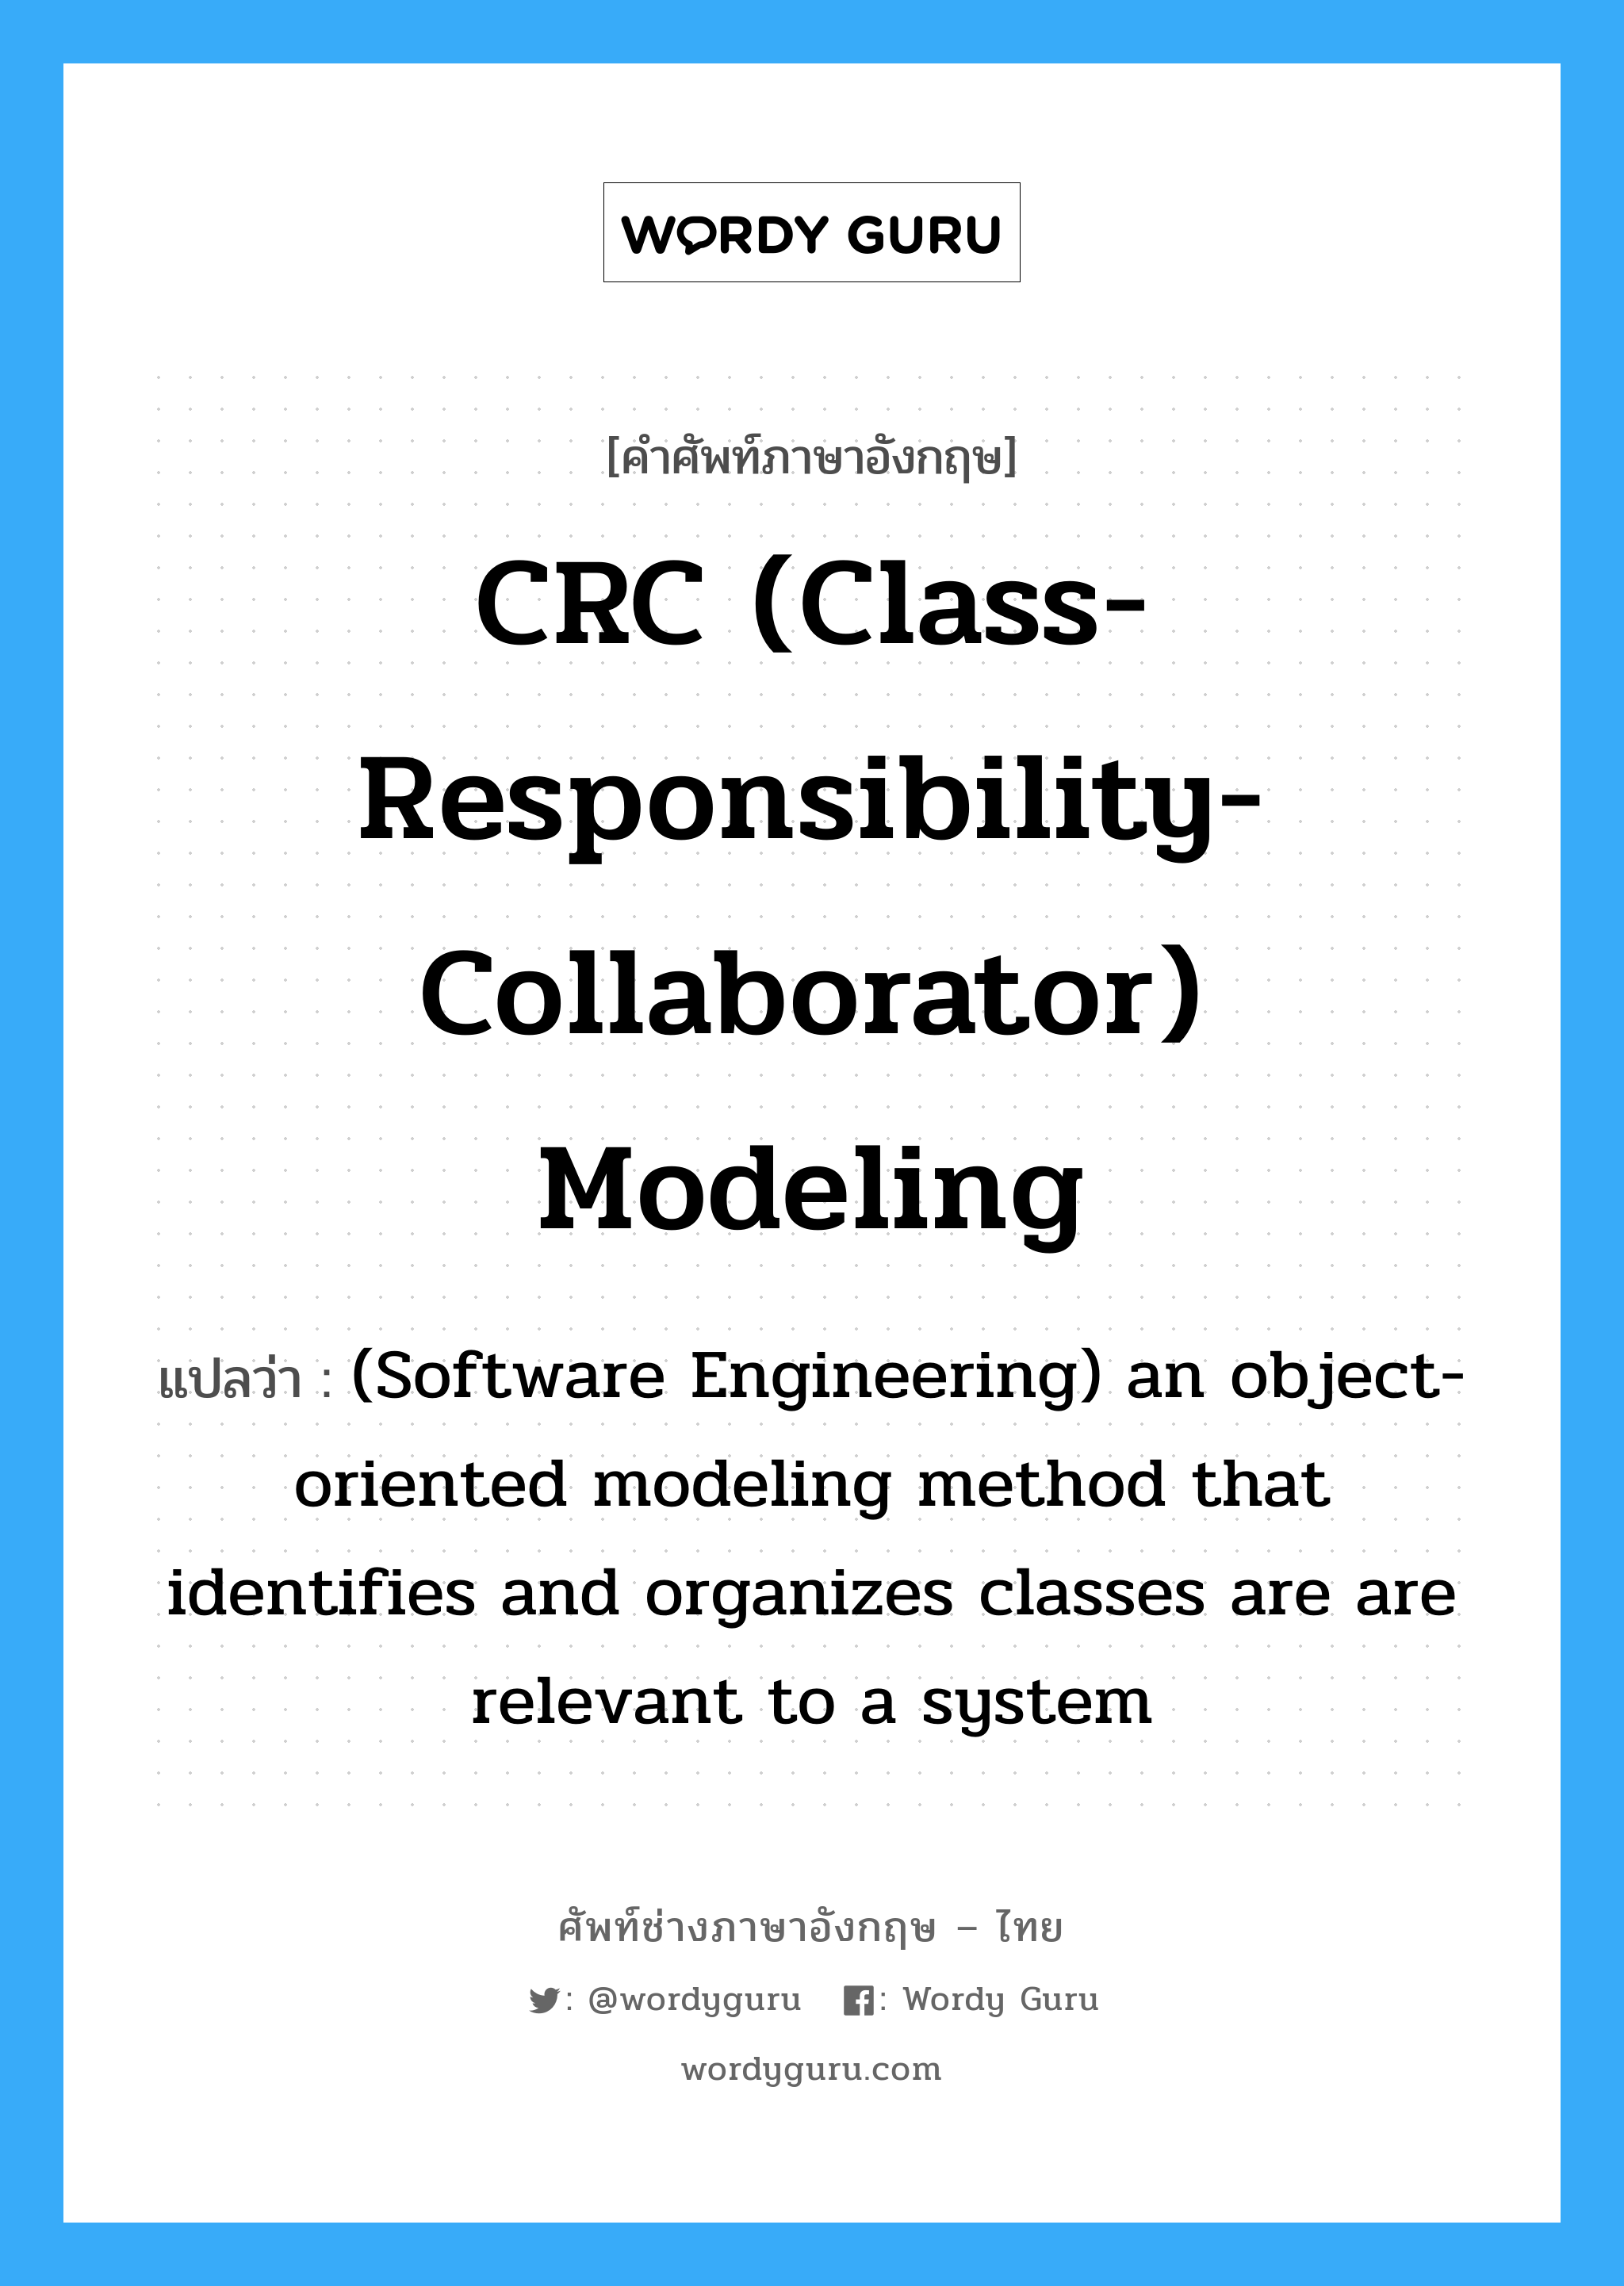 CRC (class-responsibility-collaborator) modeling แปลว่า?, คำศัพท์ช่างภาษาอังกฤษ - ไทย CRC (class-responsibility-collaborator) modeling คำศัพท์ภาษาอังกฤษ CRC (class-responsibility-collaborator) modeling แปลว่า (Software Engineering) an object-oriented modeling method that identifies and organizes classes are are relevant to a system